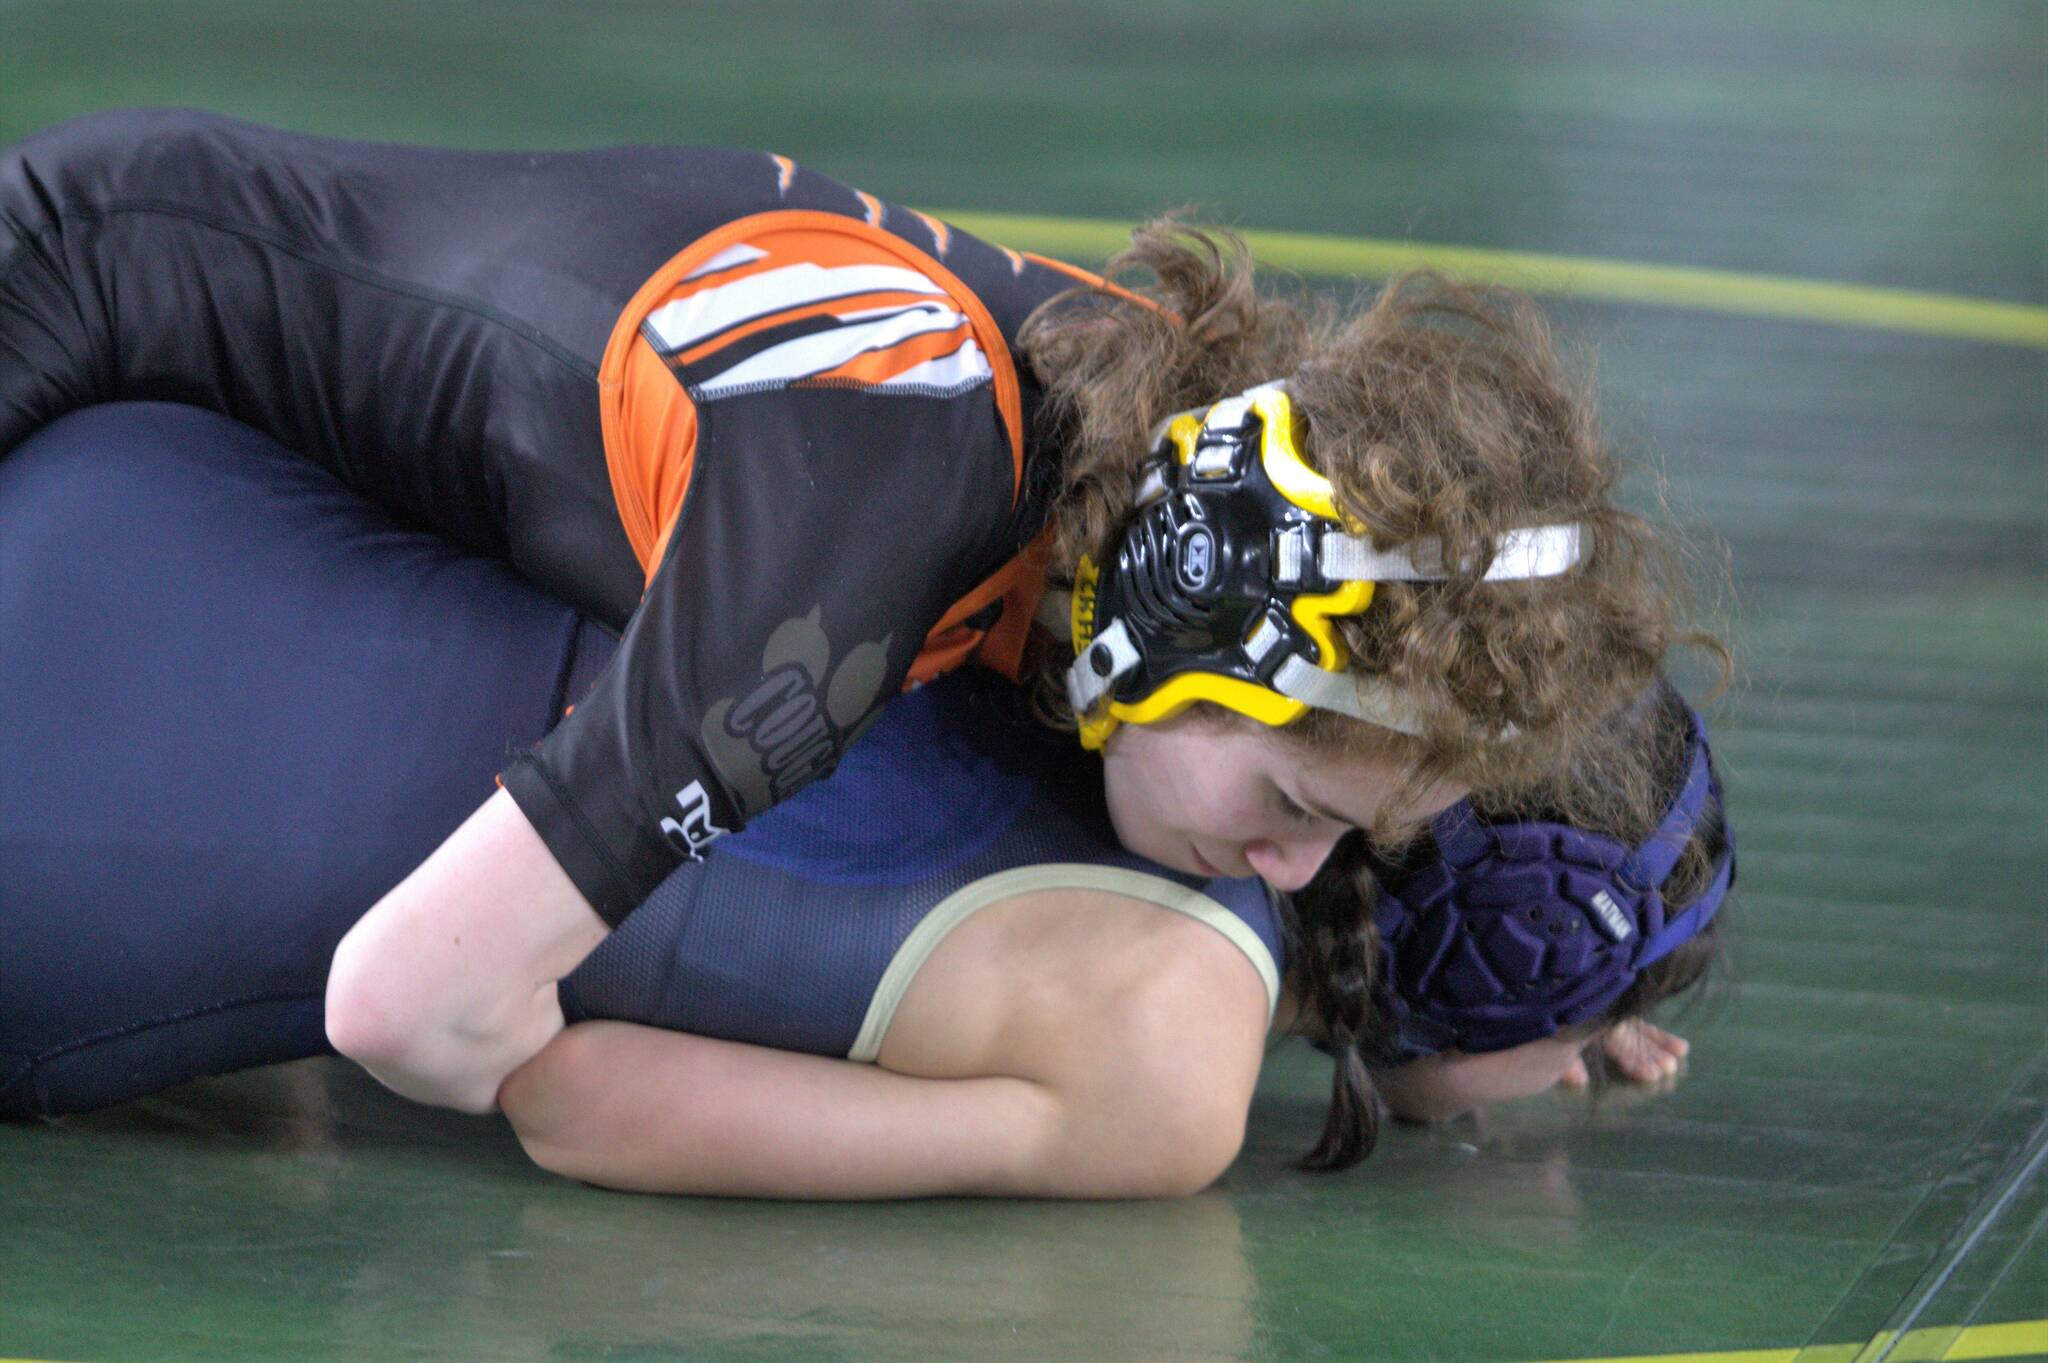 Angel Cartagena looks to pin her opponent.